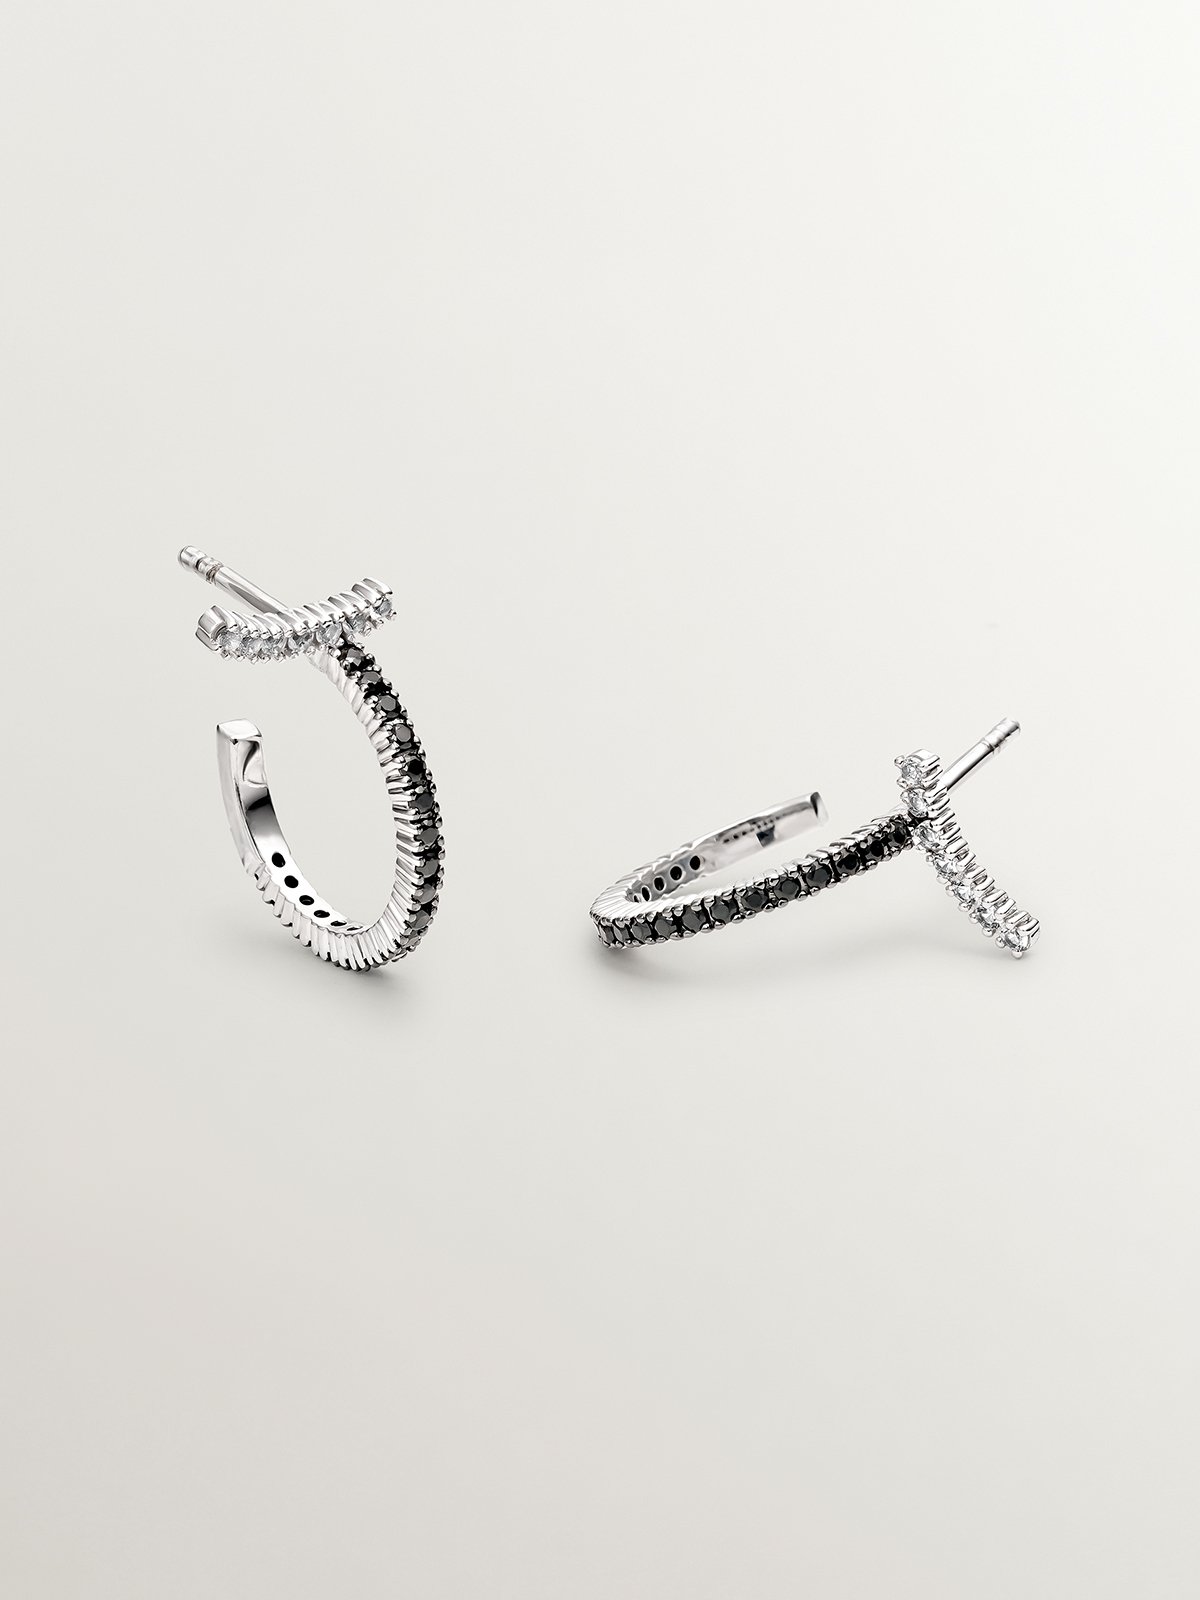 925 Silver hoop earrings with white topazes and black spinels.